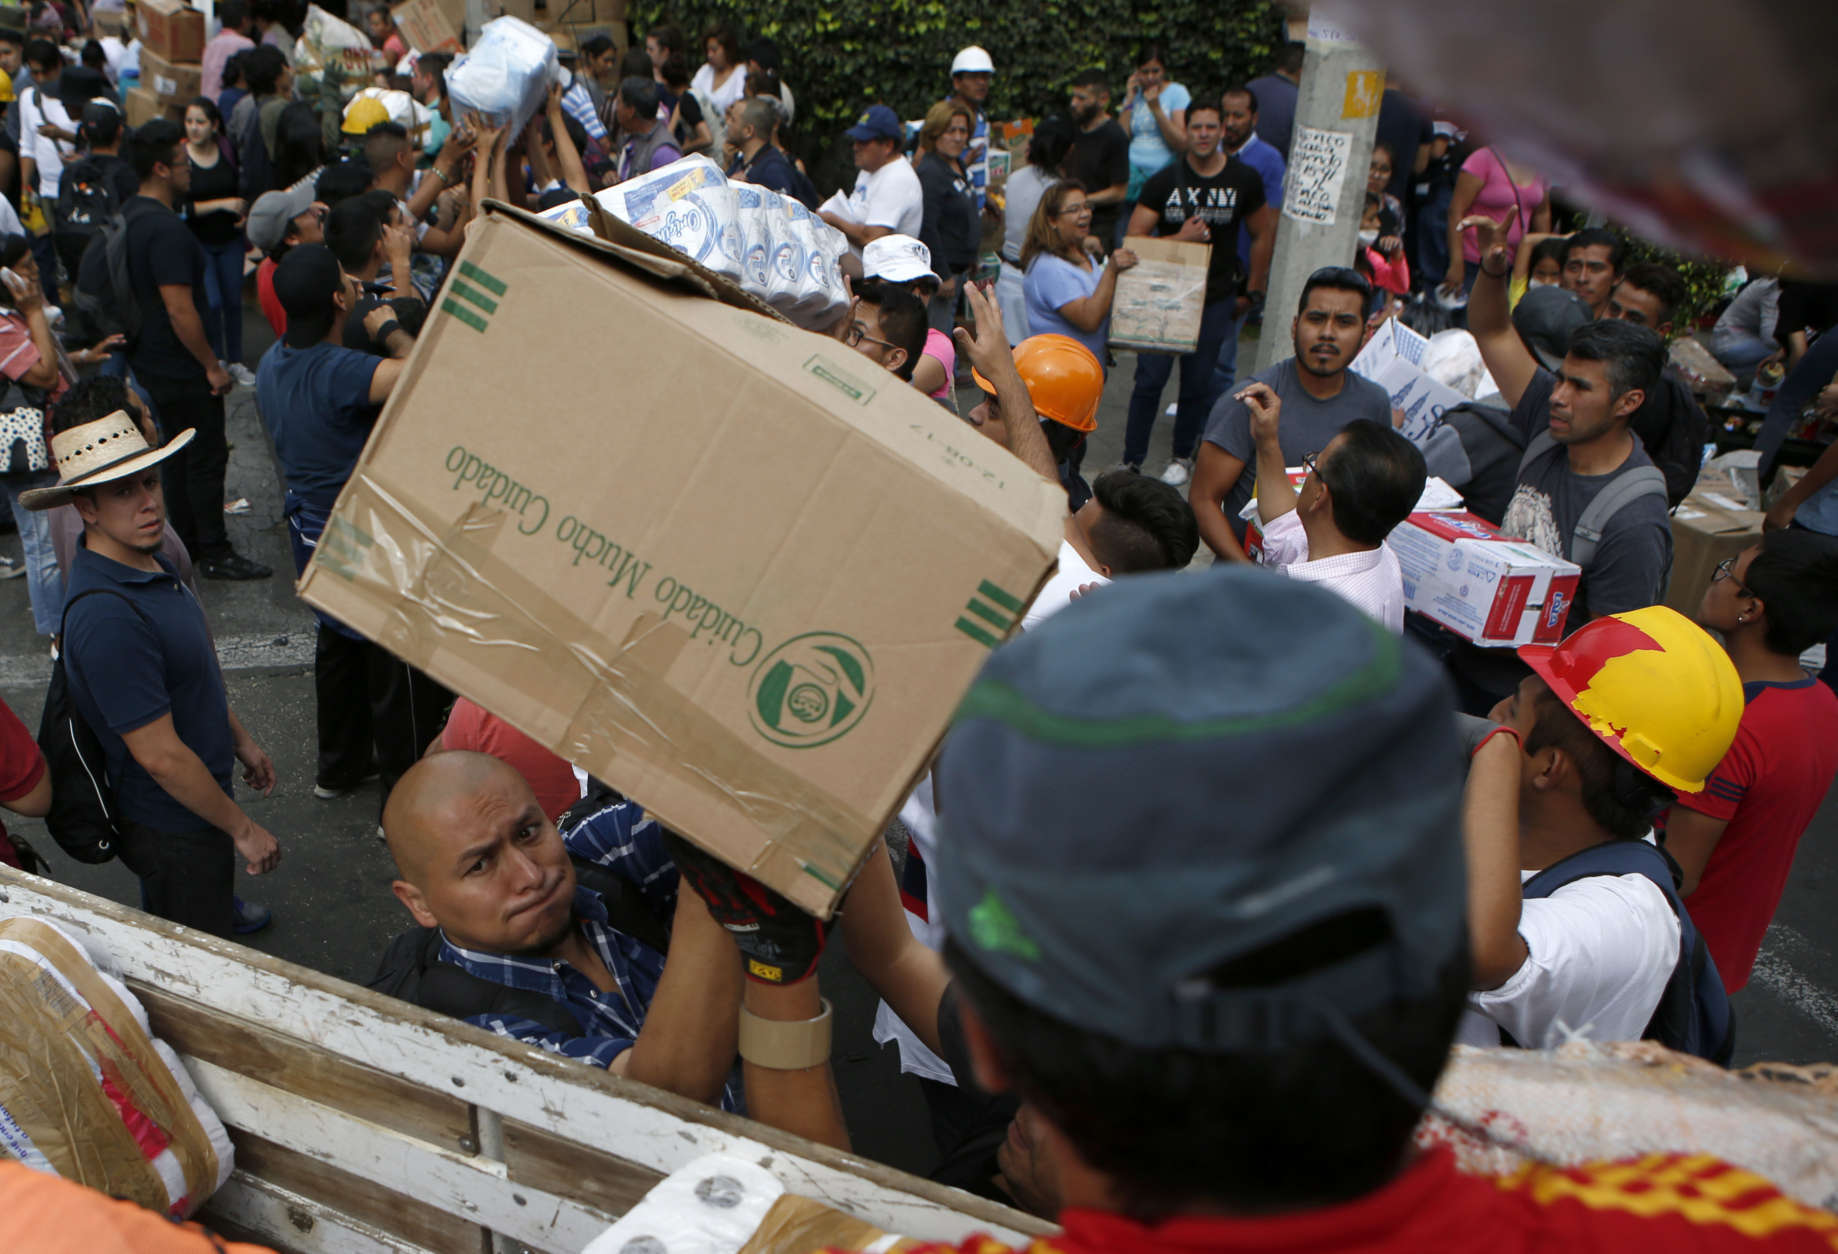 Volunteers load emergency supplies to be taken to another earthquake stricken area, in the Linda Vista neighborhood of Mexico City, Wednesday, Sept. 20, 2017. People by the millions rushed from homes and offices across central Mexico, after a 7.1 earthquake, sometimes watching as buildings they had just fled fell behind them with an eruption of dust and debris. (AP Photo/Rebecca Blackwell)